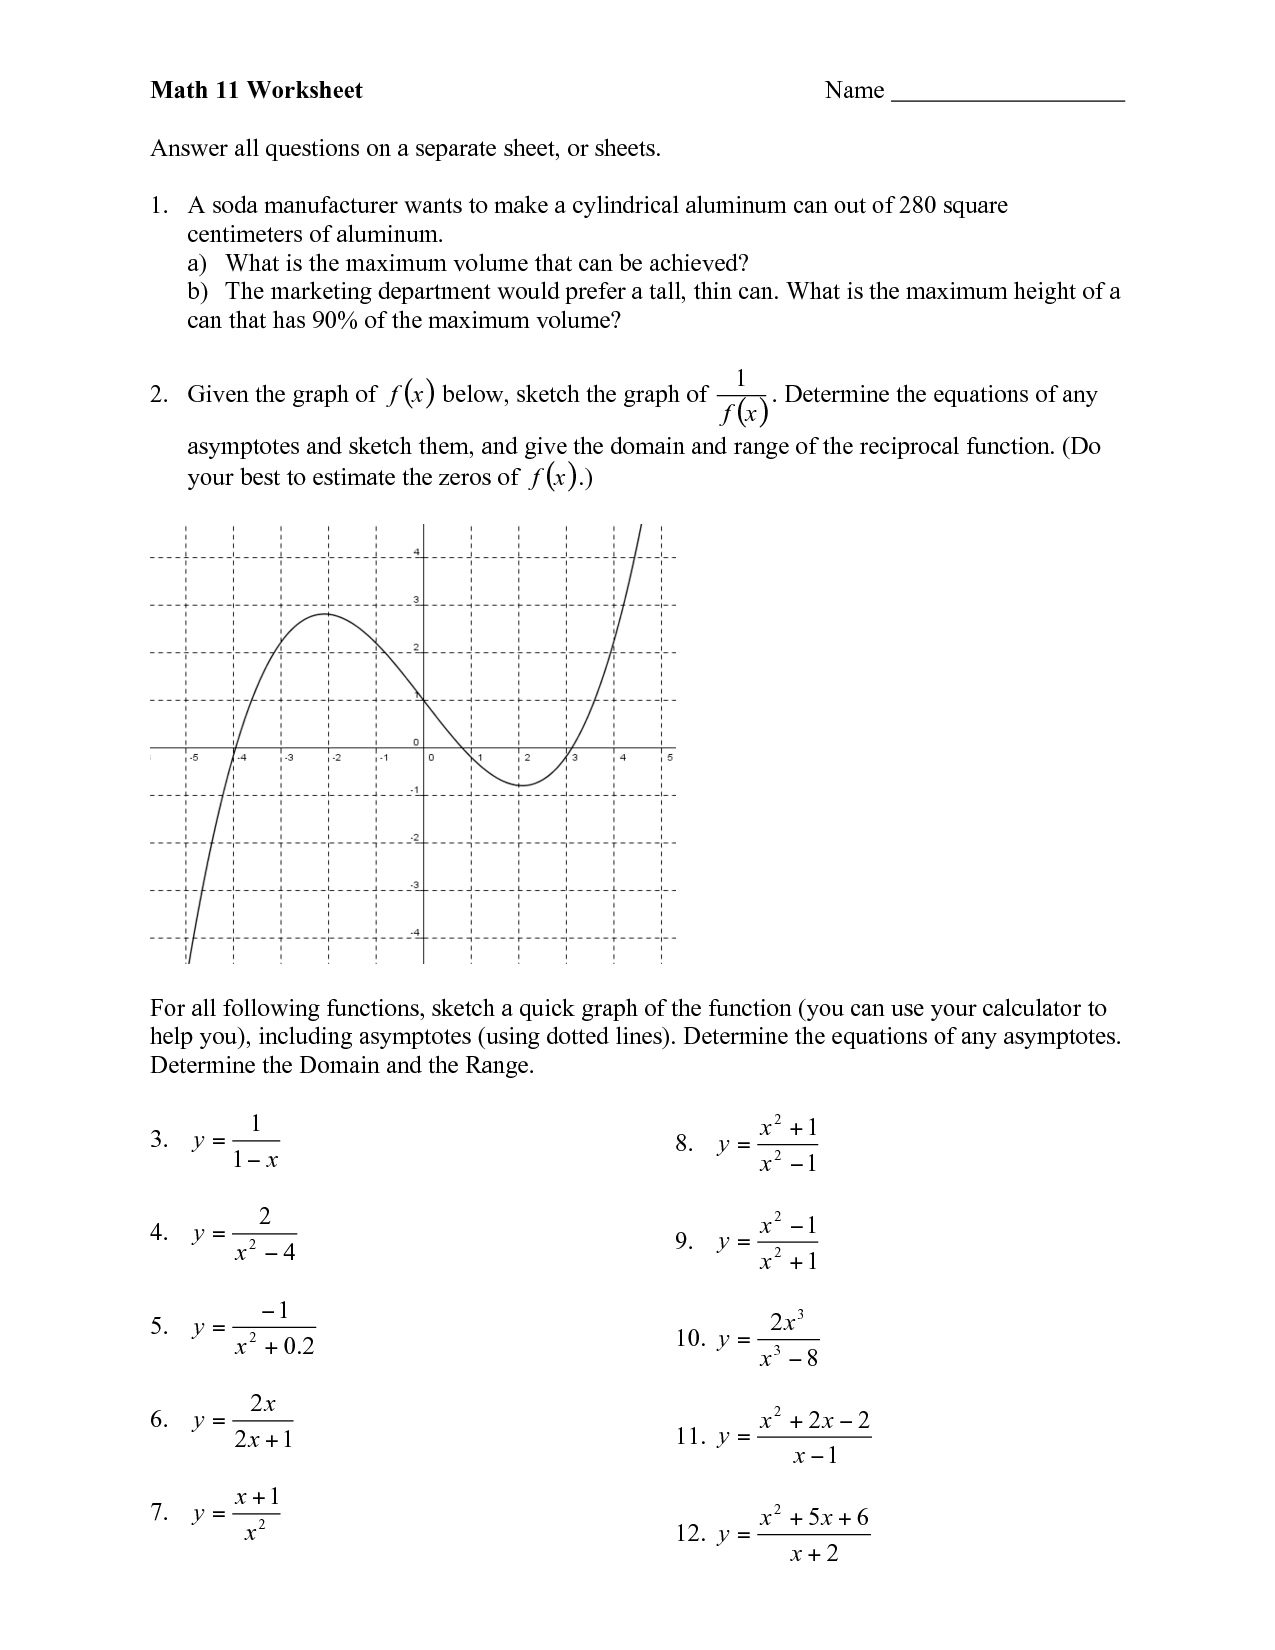 8-best-images-of-11th-grade-geometry-worksheets-11th-grade-math-worksheets-printable-11th